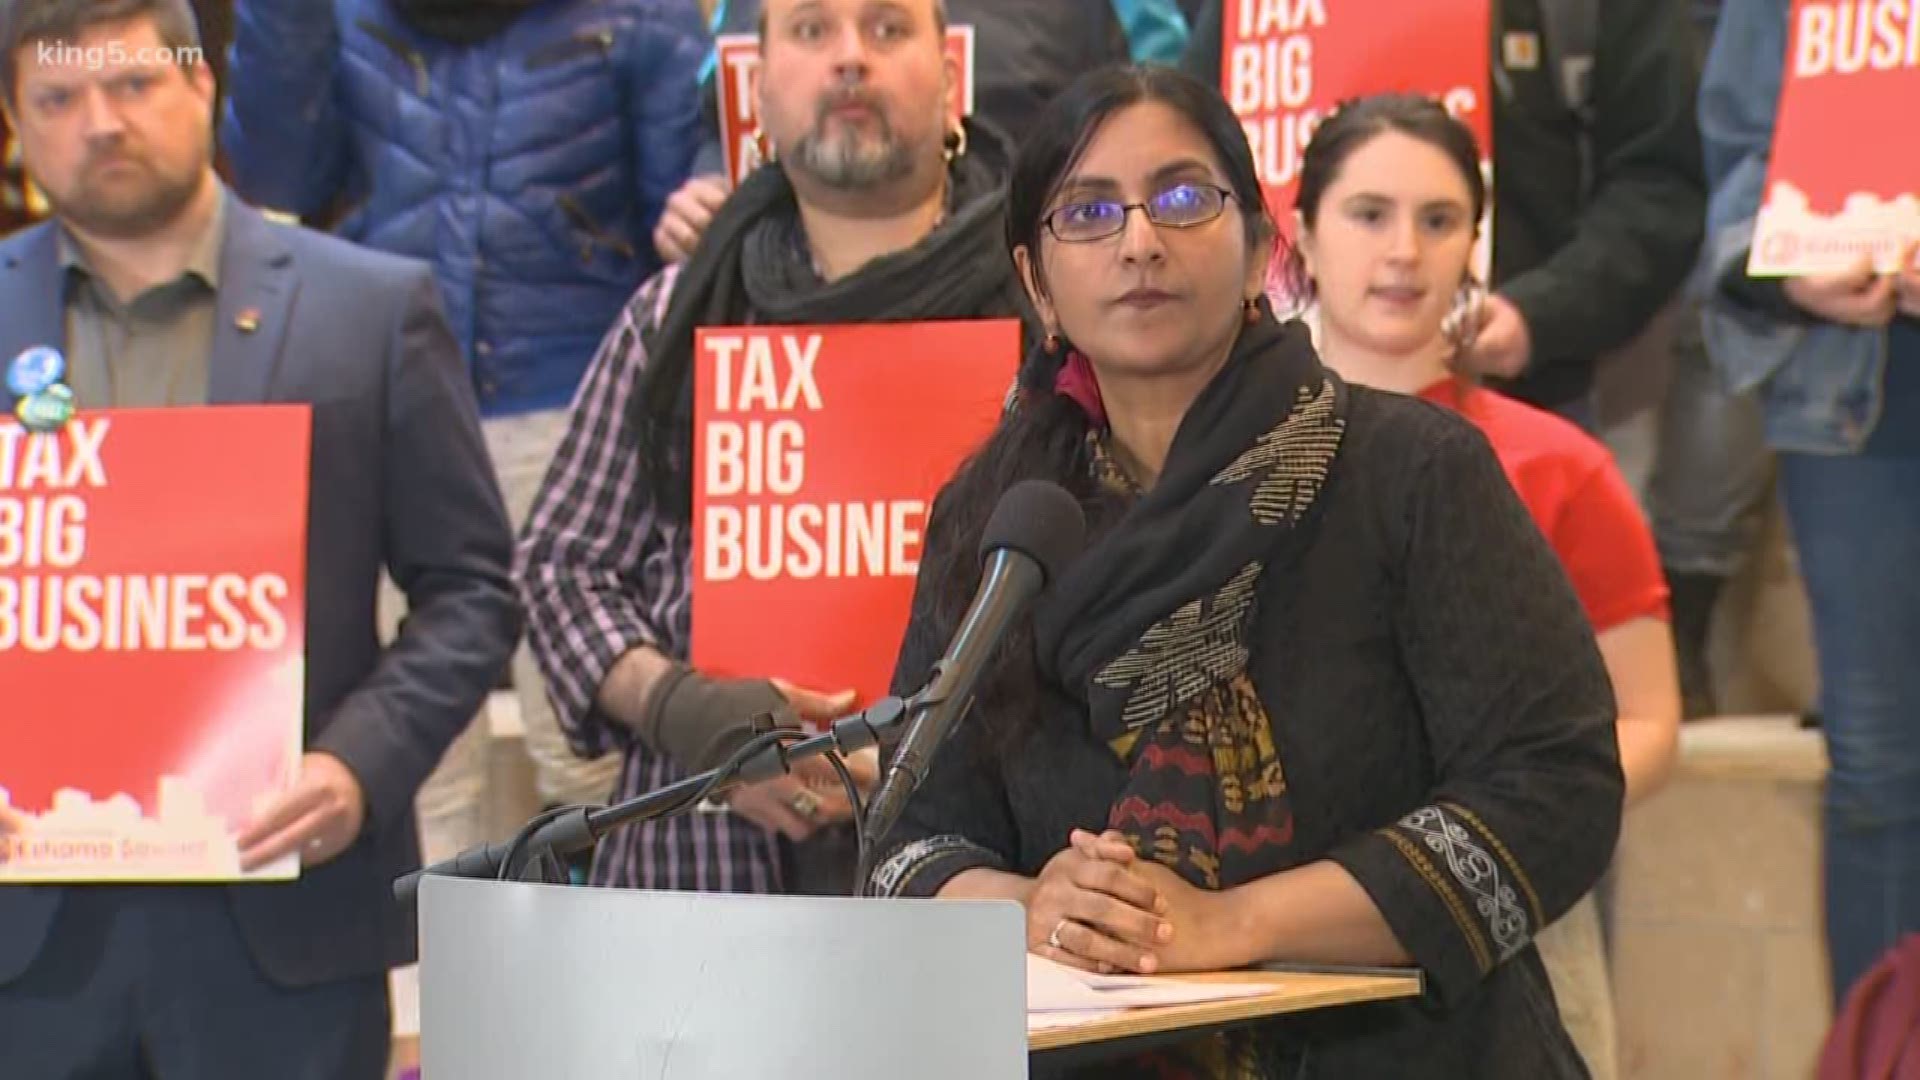 Seattle City Councilmember Kshama Sawant could face thousands of dollars in fines for ethics violations surrounding her new 'Amazon Tax' proposal.